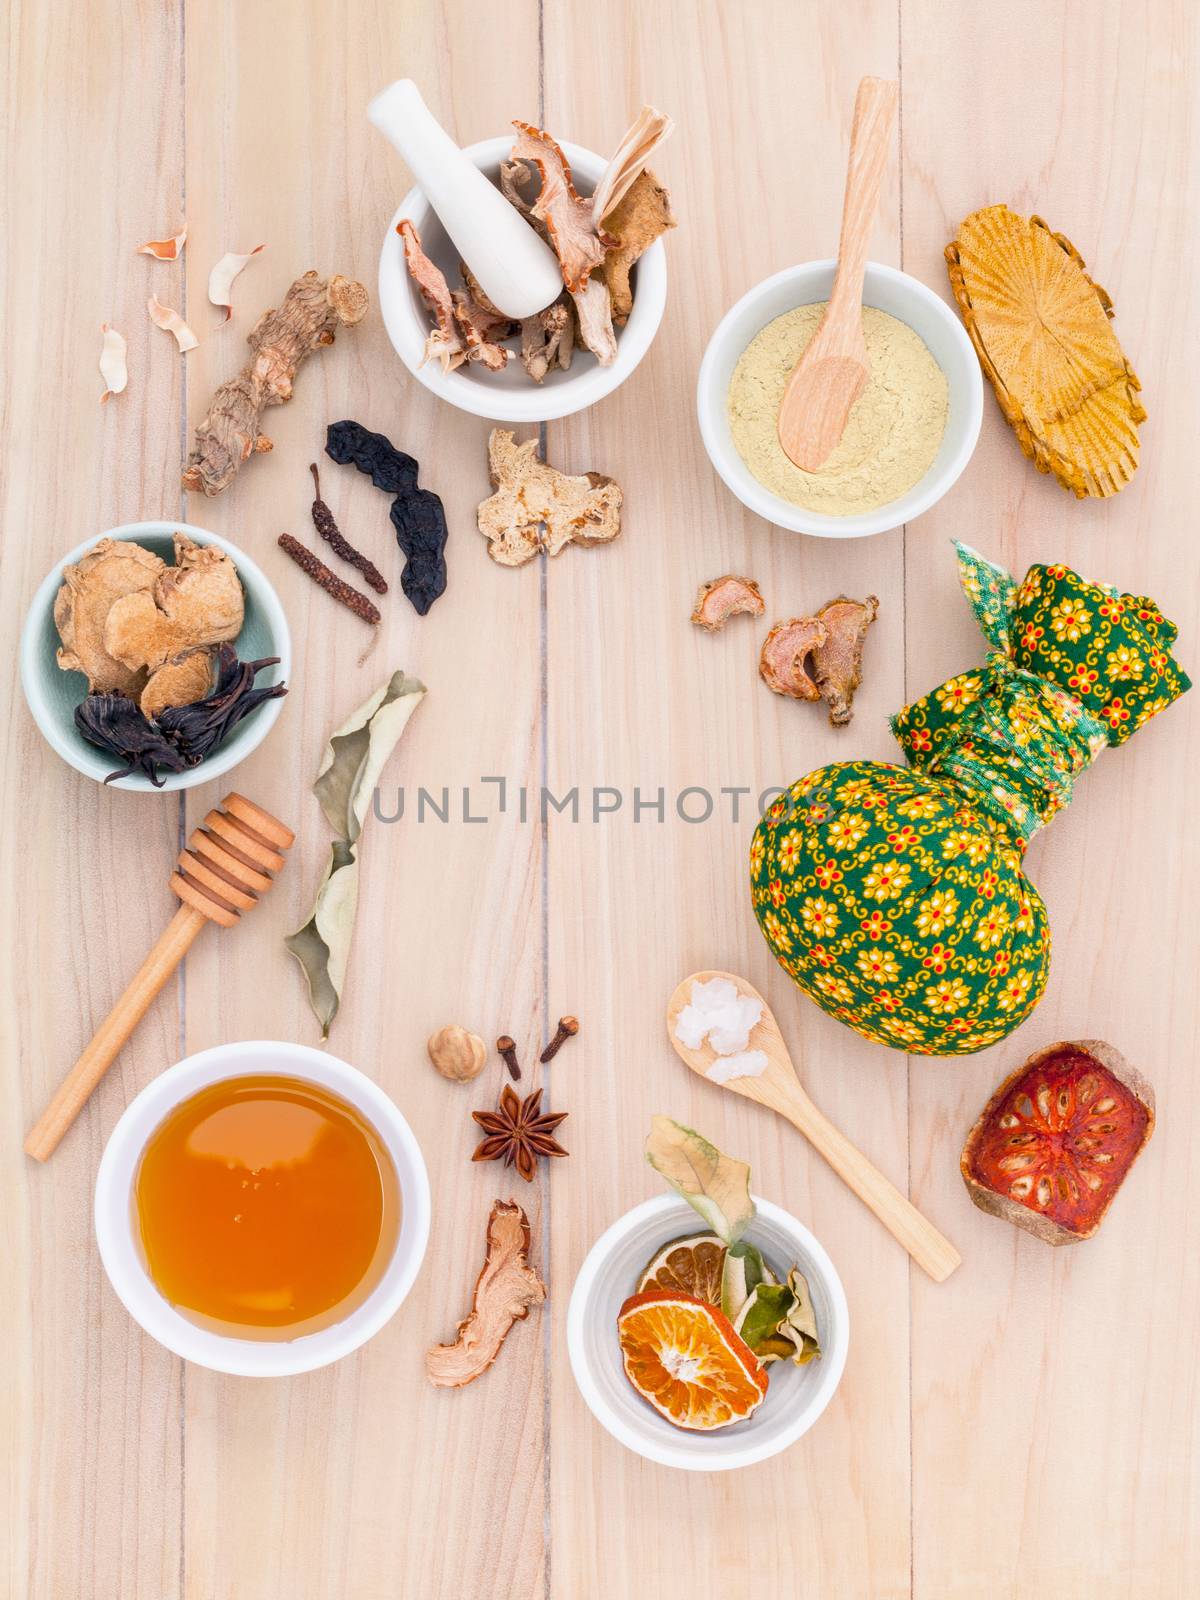 Natural Spa Ingredients herbal compress ball and herbal Ingredients for alternative medicine and relaxation Thai Spa theme with wooden background.